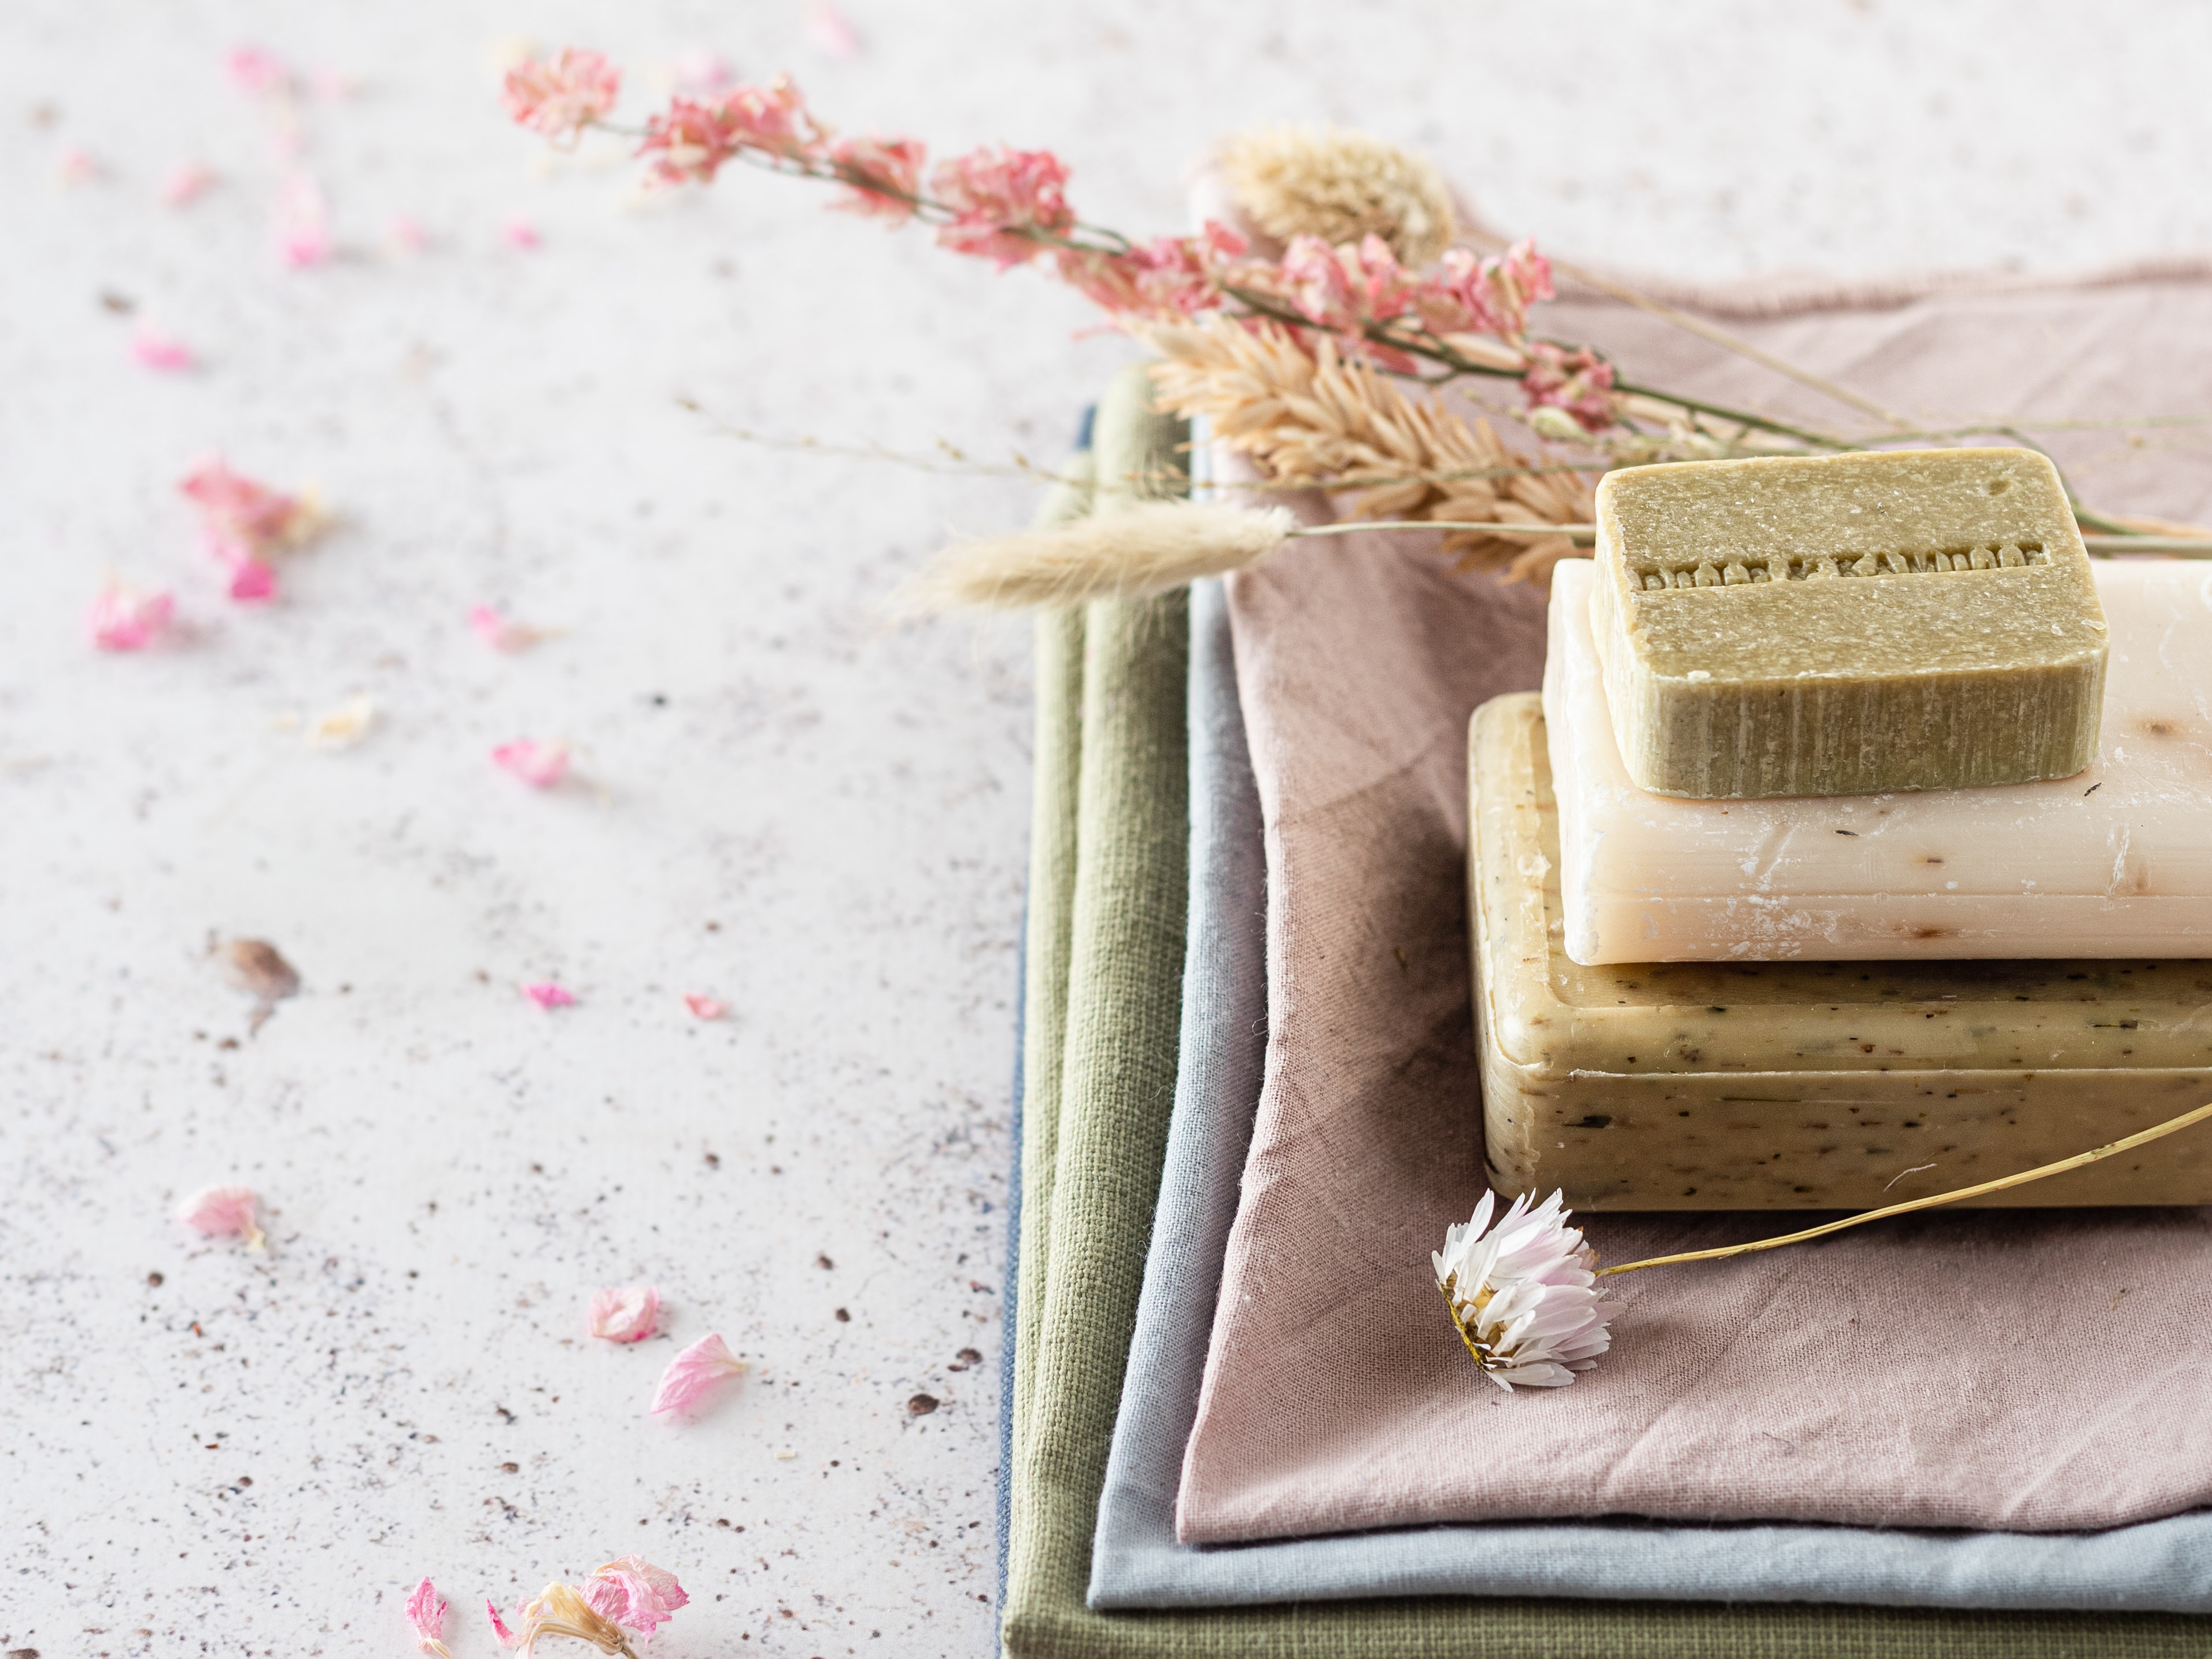 Natural soap and cloths with dried flowers